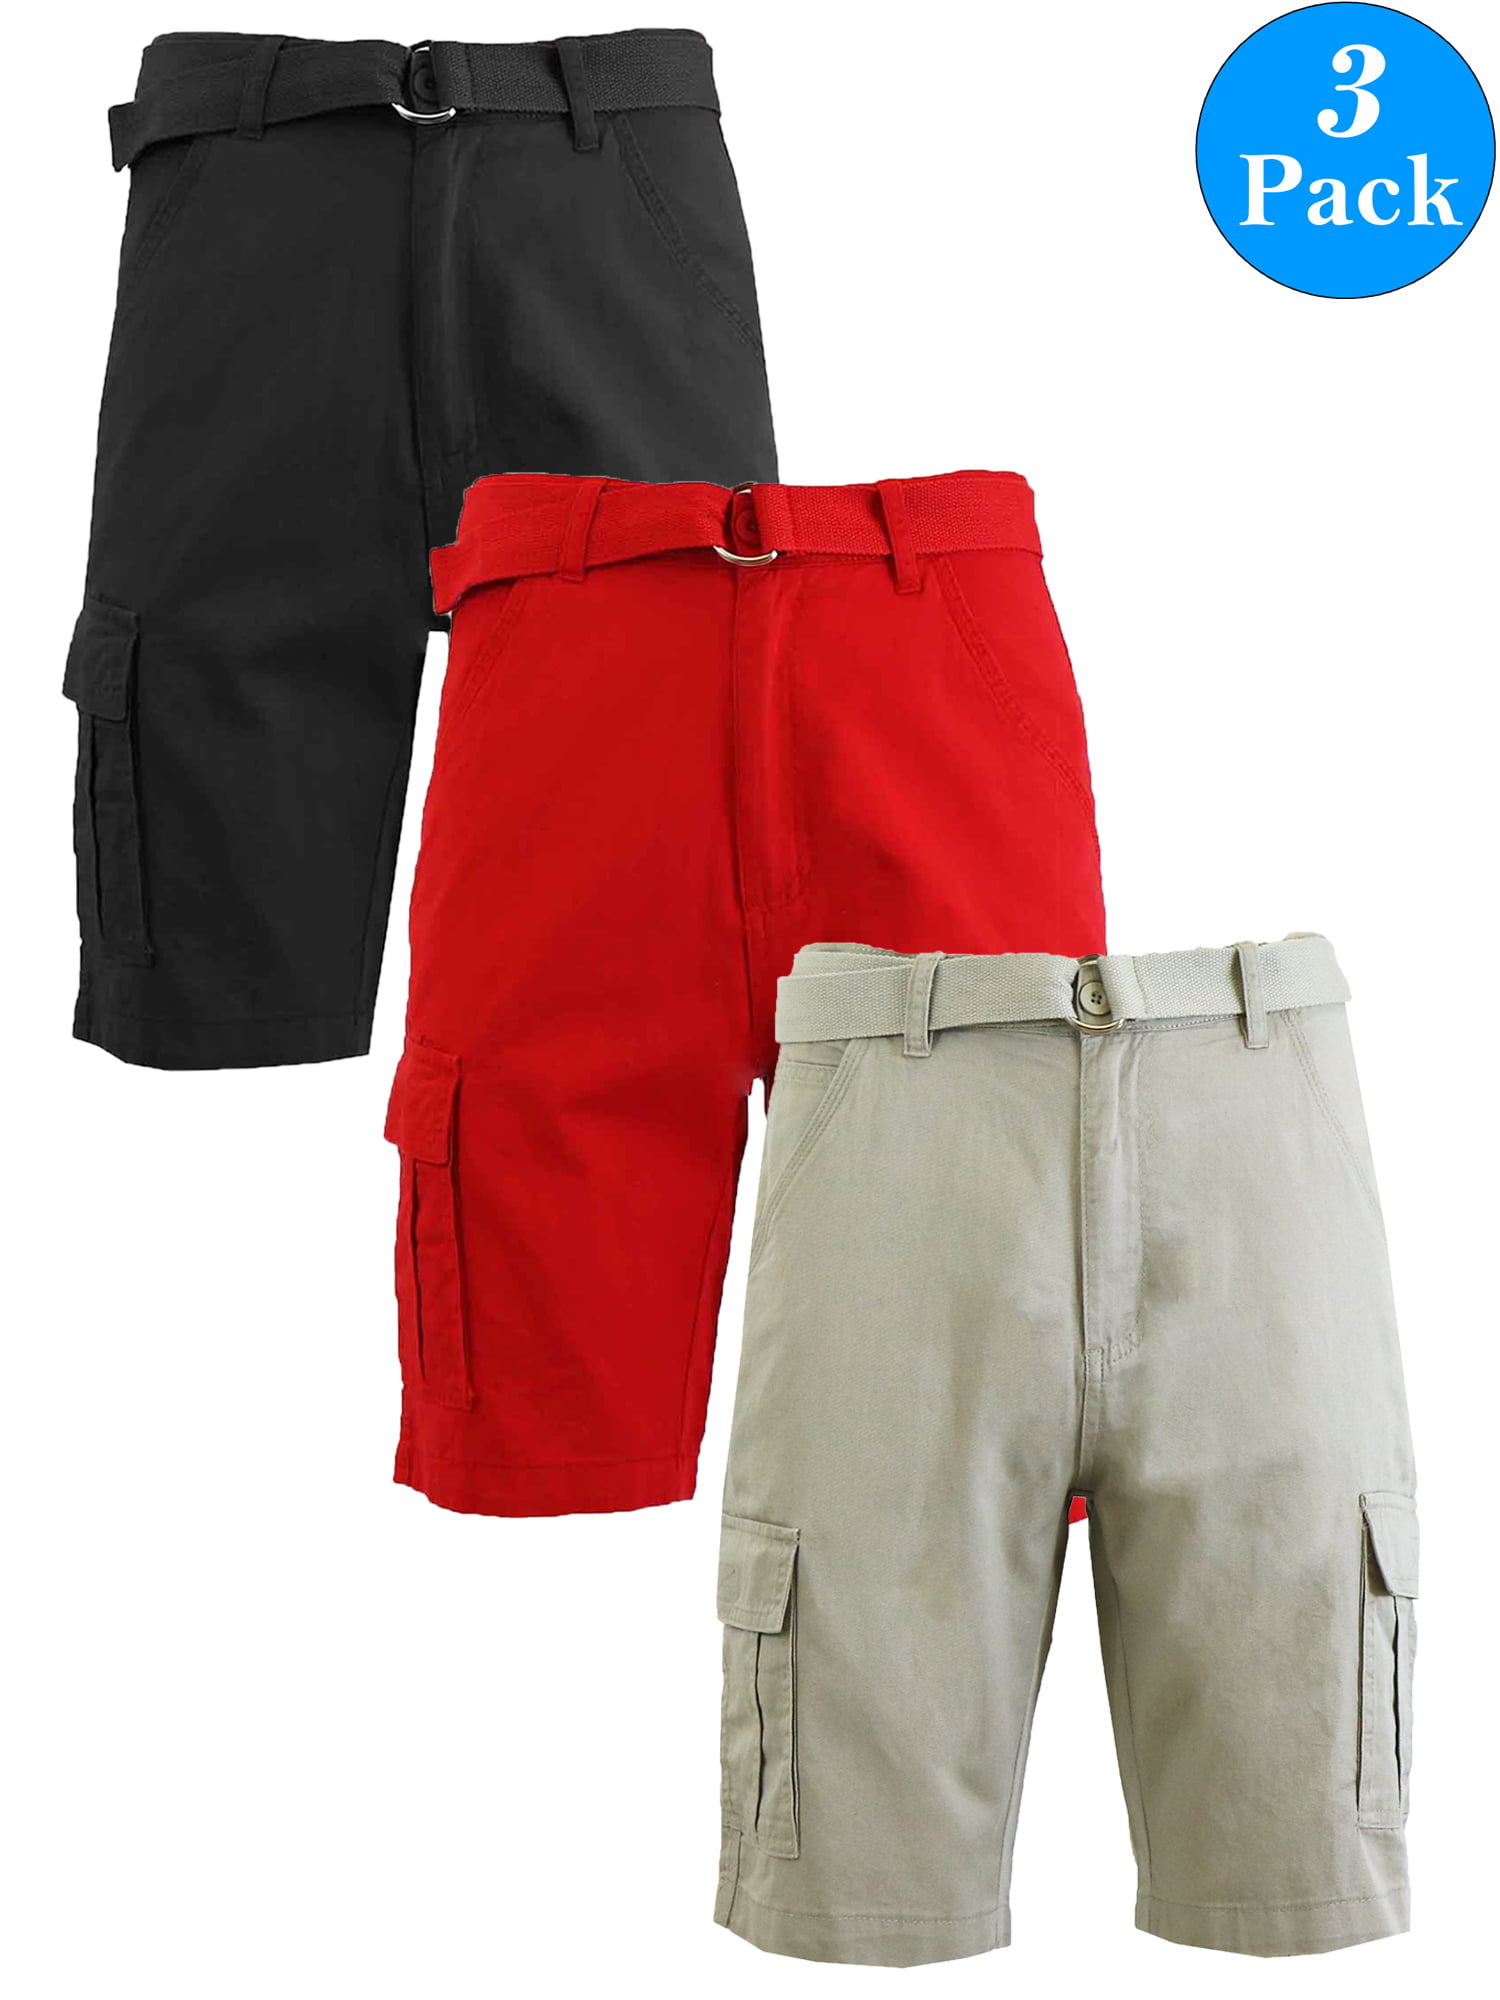 Gbh Men S Belted Cotton Cargo Shorts 3 Pack